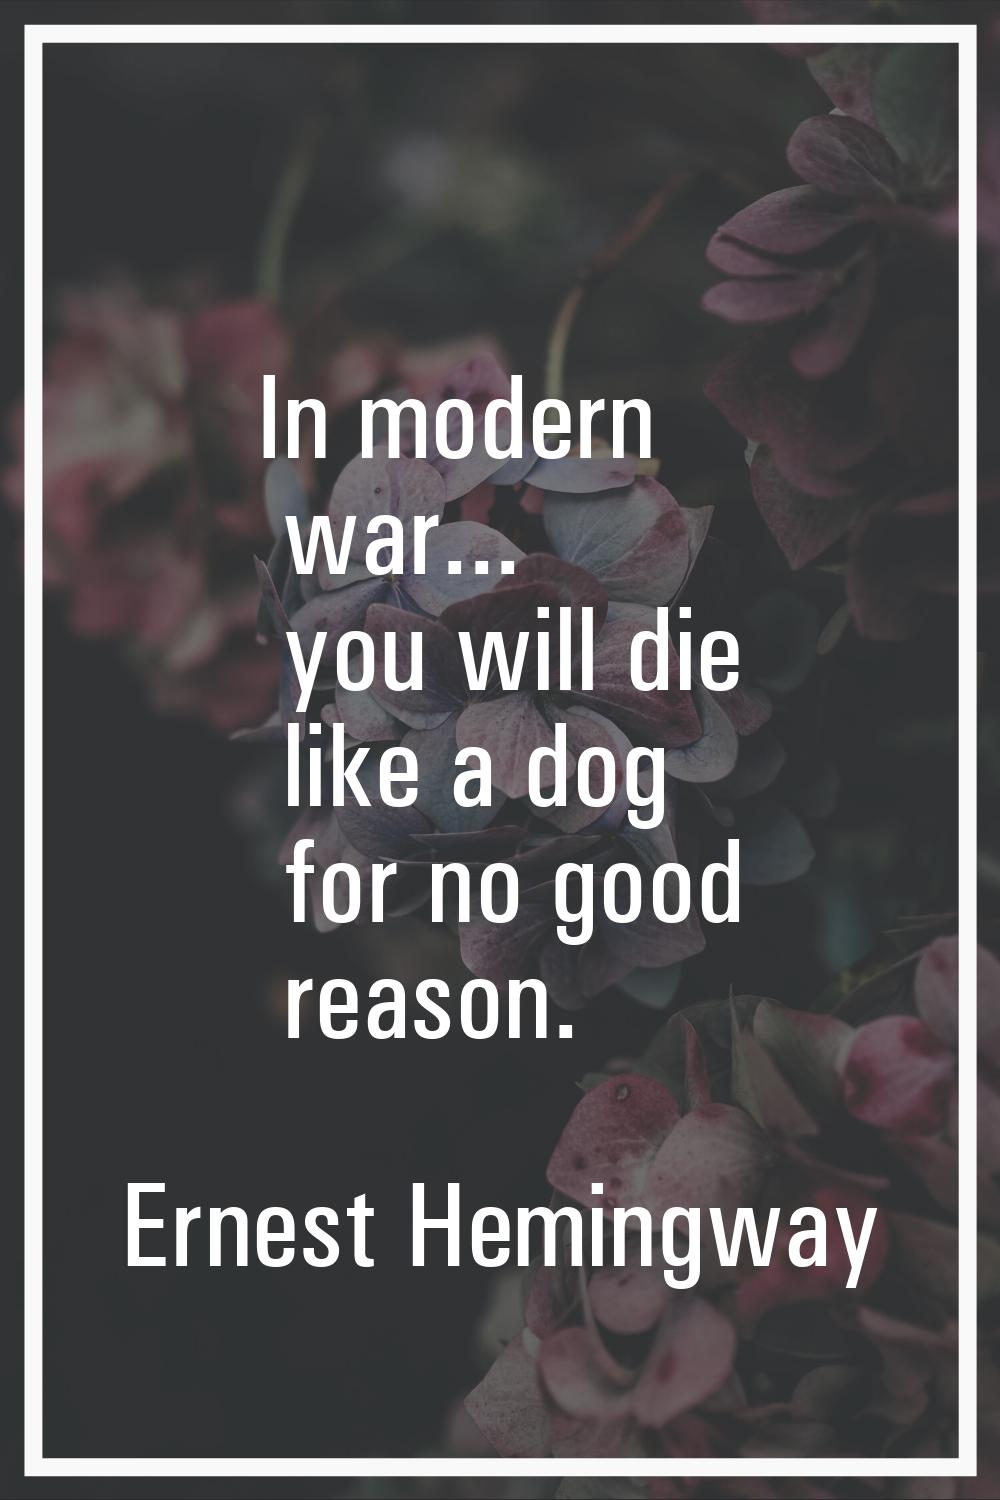 In modern war... you will die like a dog for no good reason.